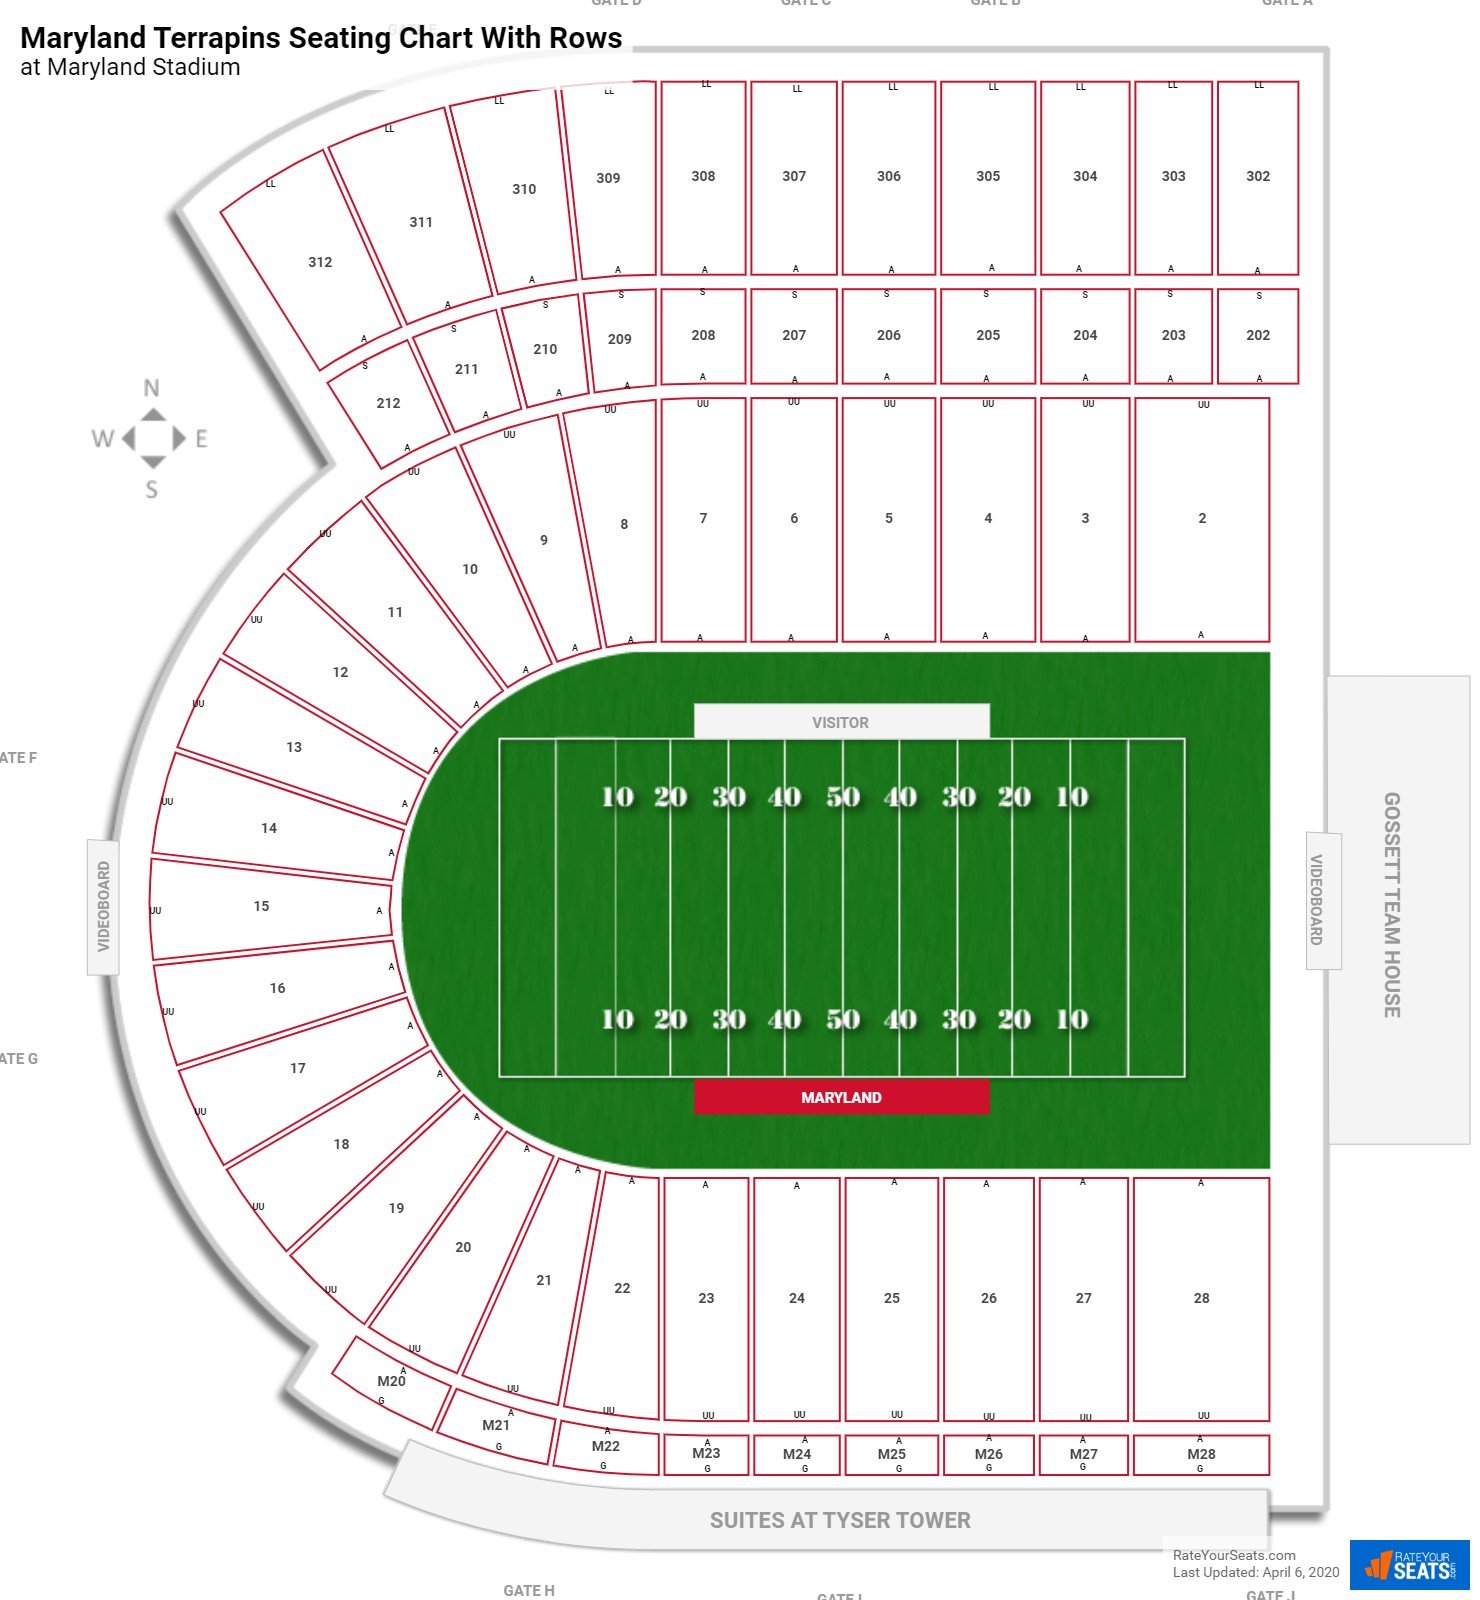 Maryland Stadium seating chart with row numbers